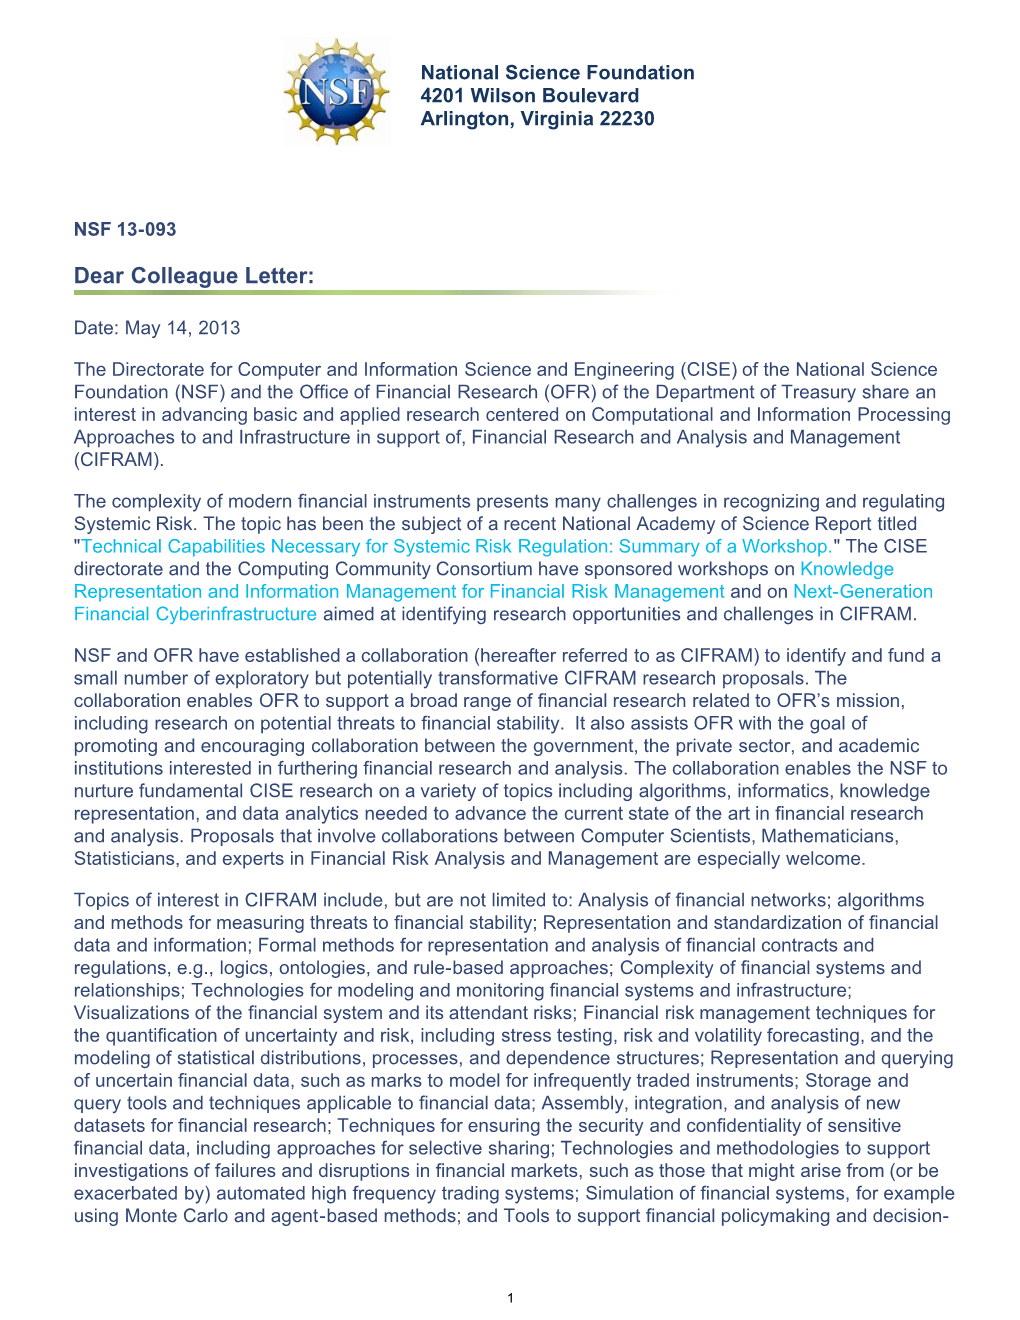 Dear Colleague Letter: OFR-NSF Partnership in Support of Research Collaborations in Finance Informatics